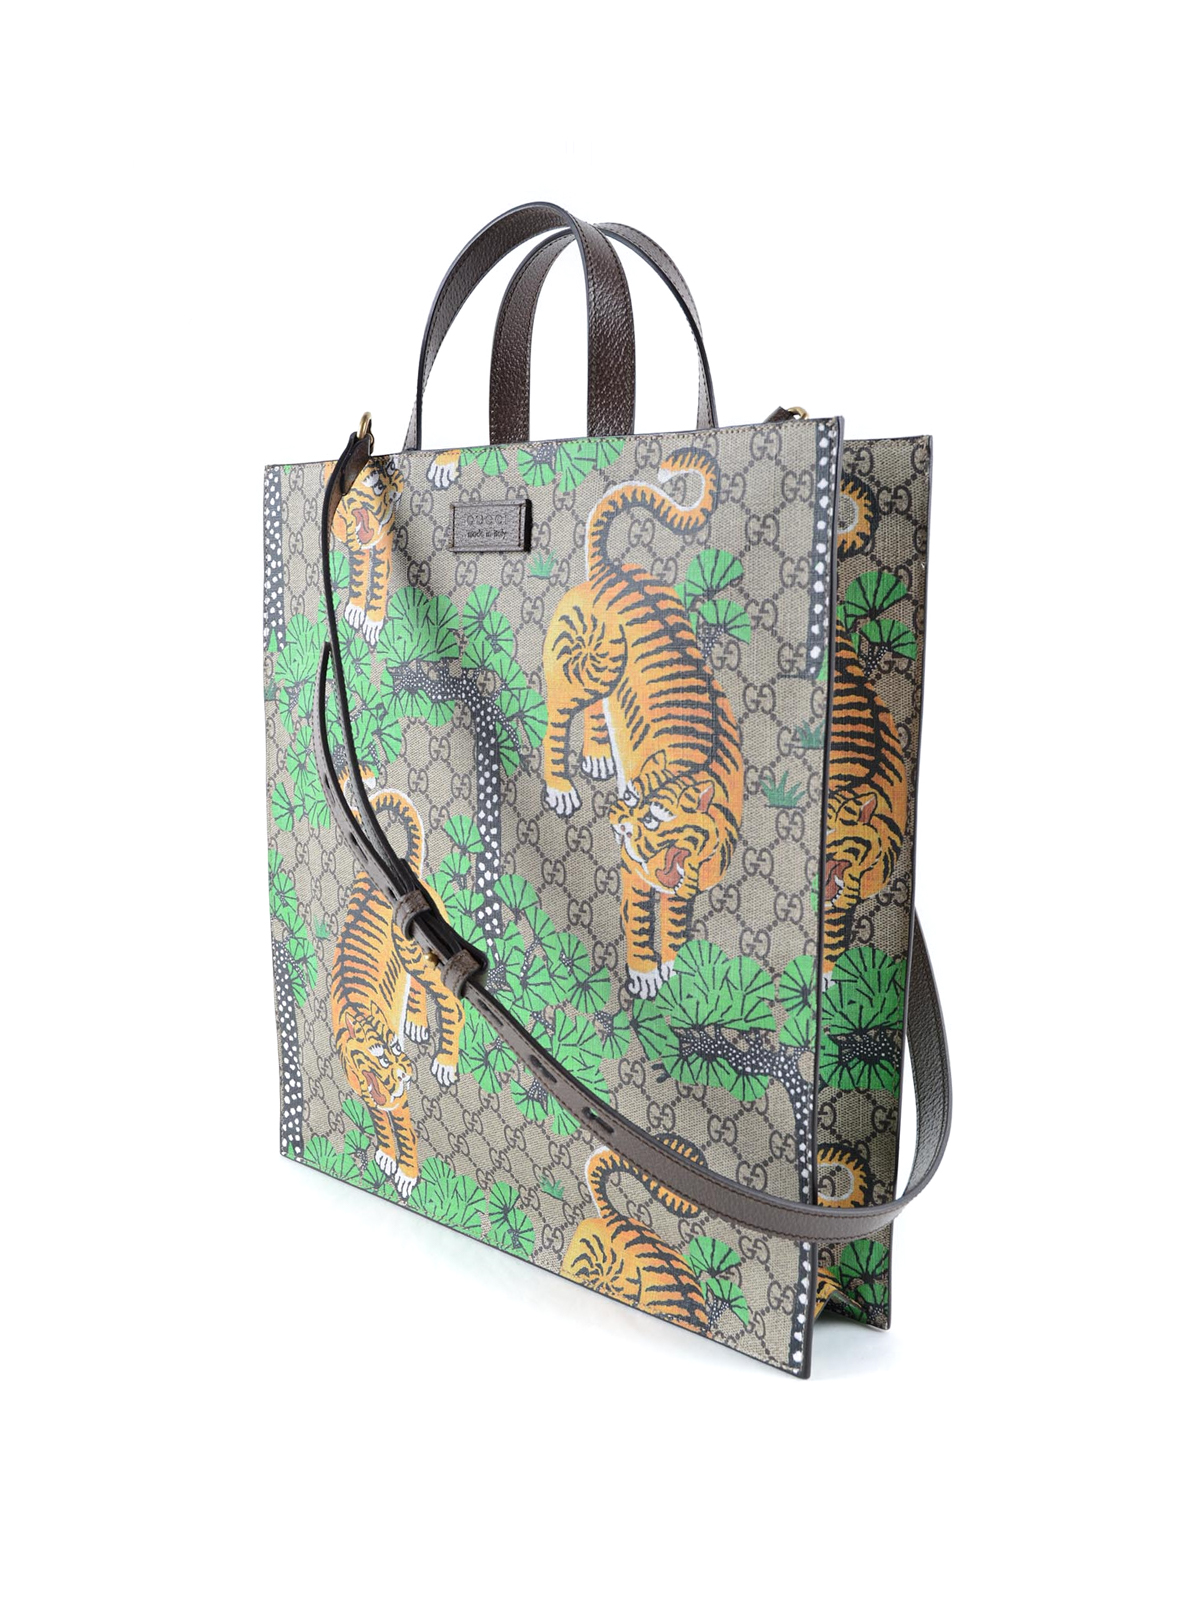 Gucci Bengal print GG canvas tote by Gucci - totes bags | Shop online at www.neverfullmm.com